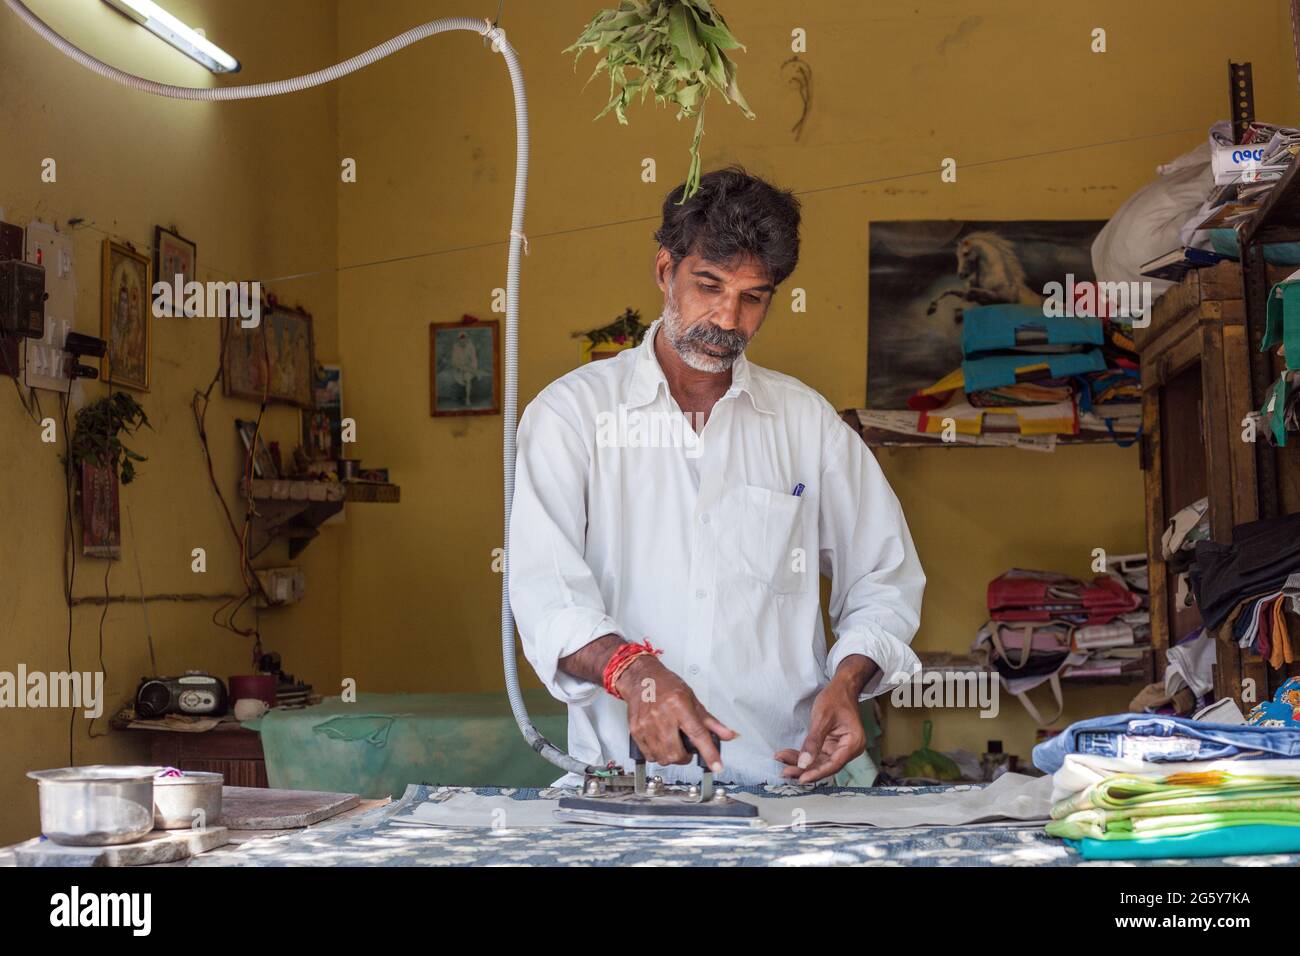 Indian male using traditional old fashioned industrial electric steam iron on garments, Puducherry (Pondicherry), Tamil Nadu, India Stock Photo